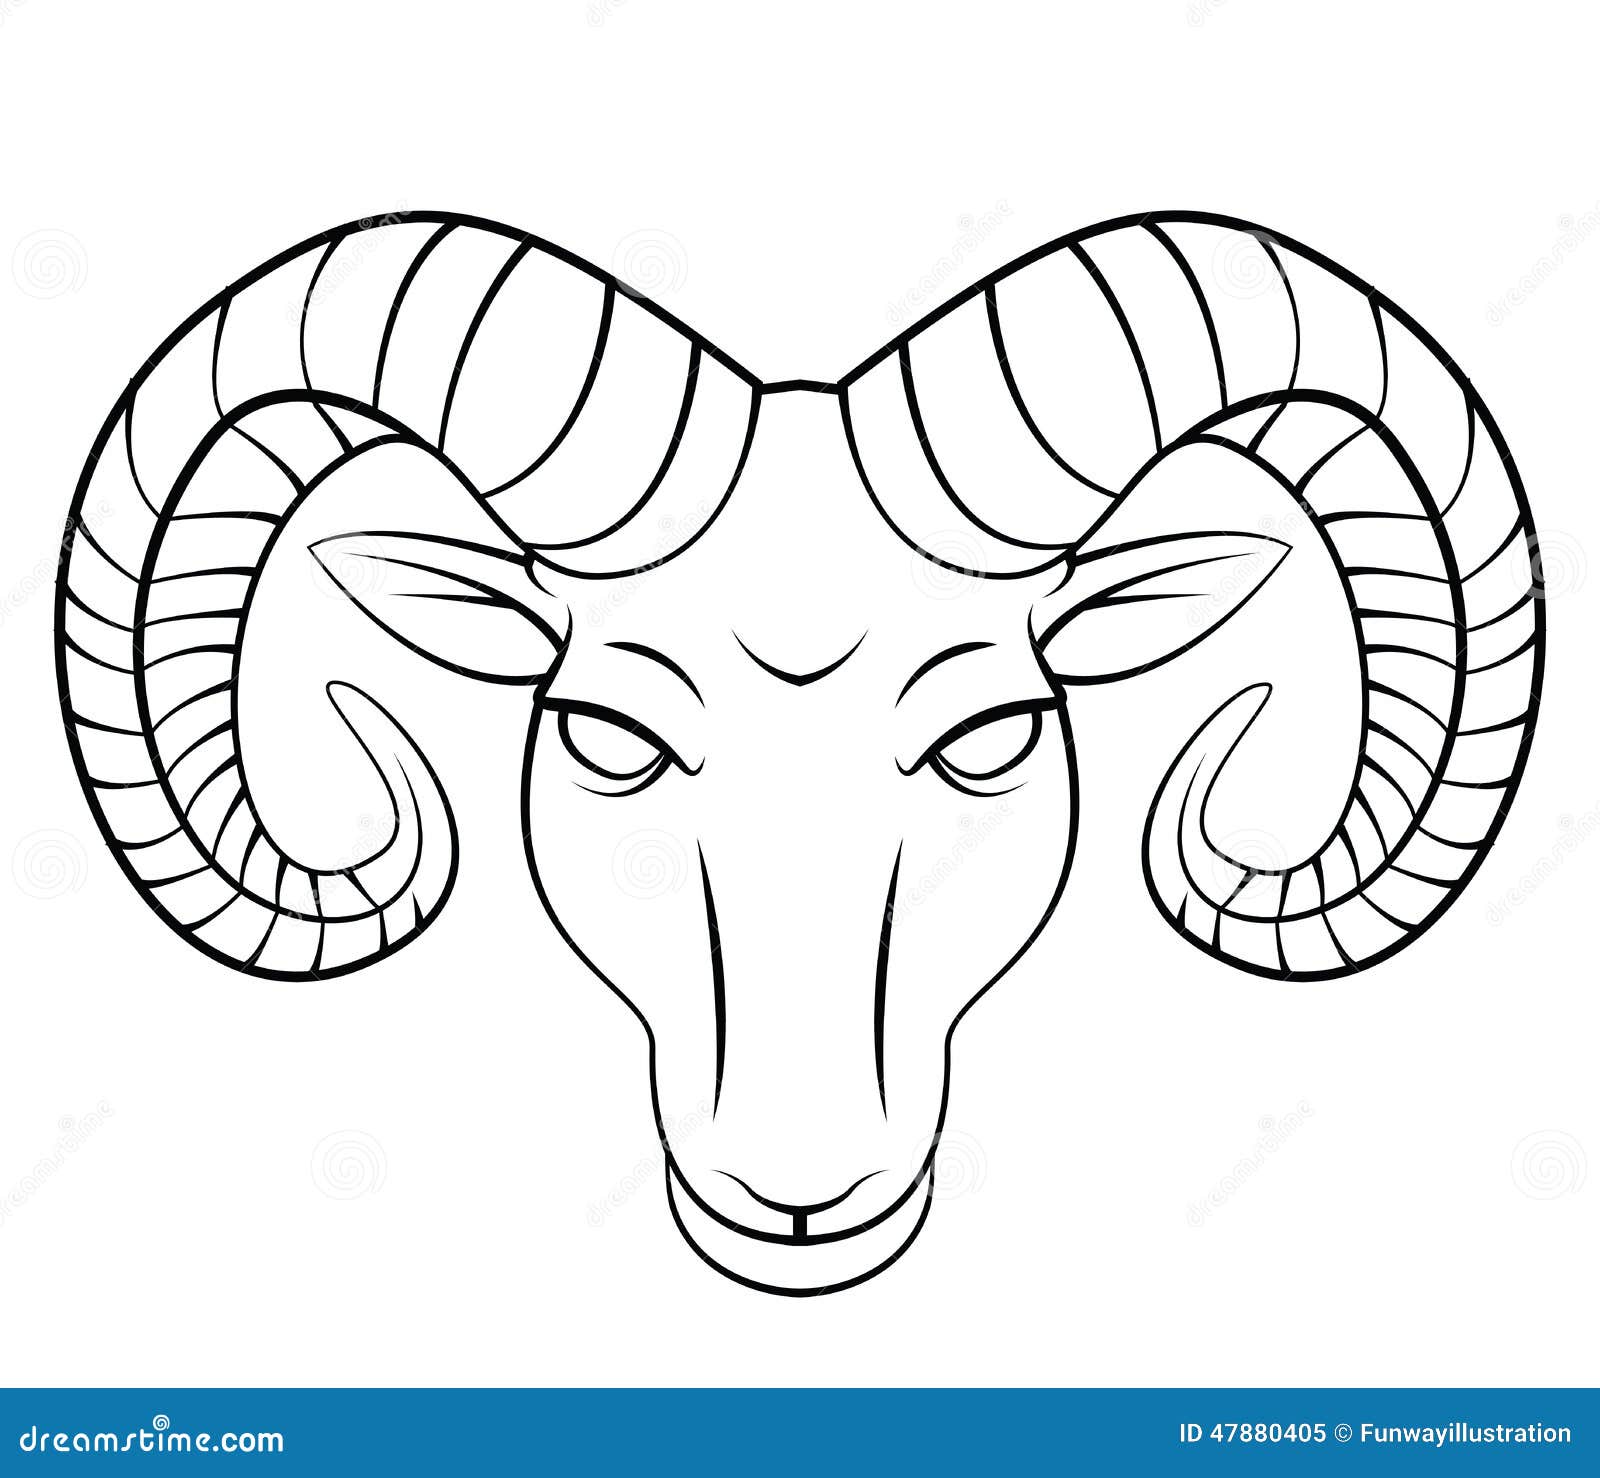 Goat Head stock vector. Illustration of design, isolated - 47880405